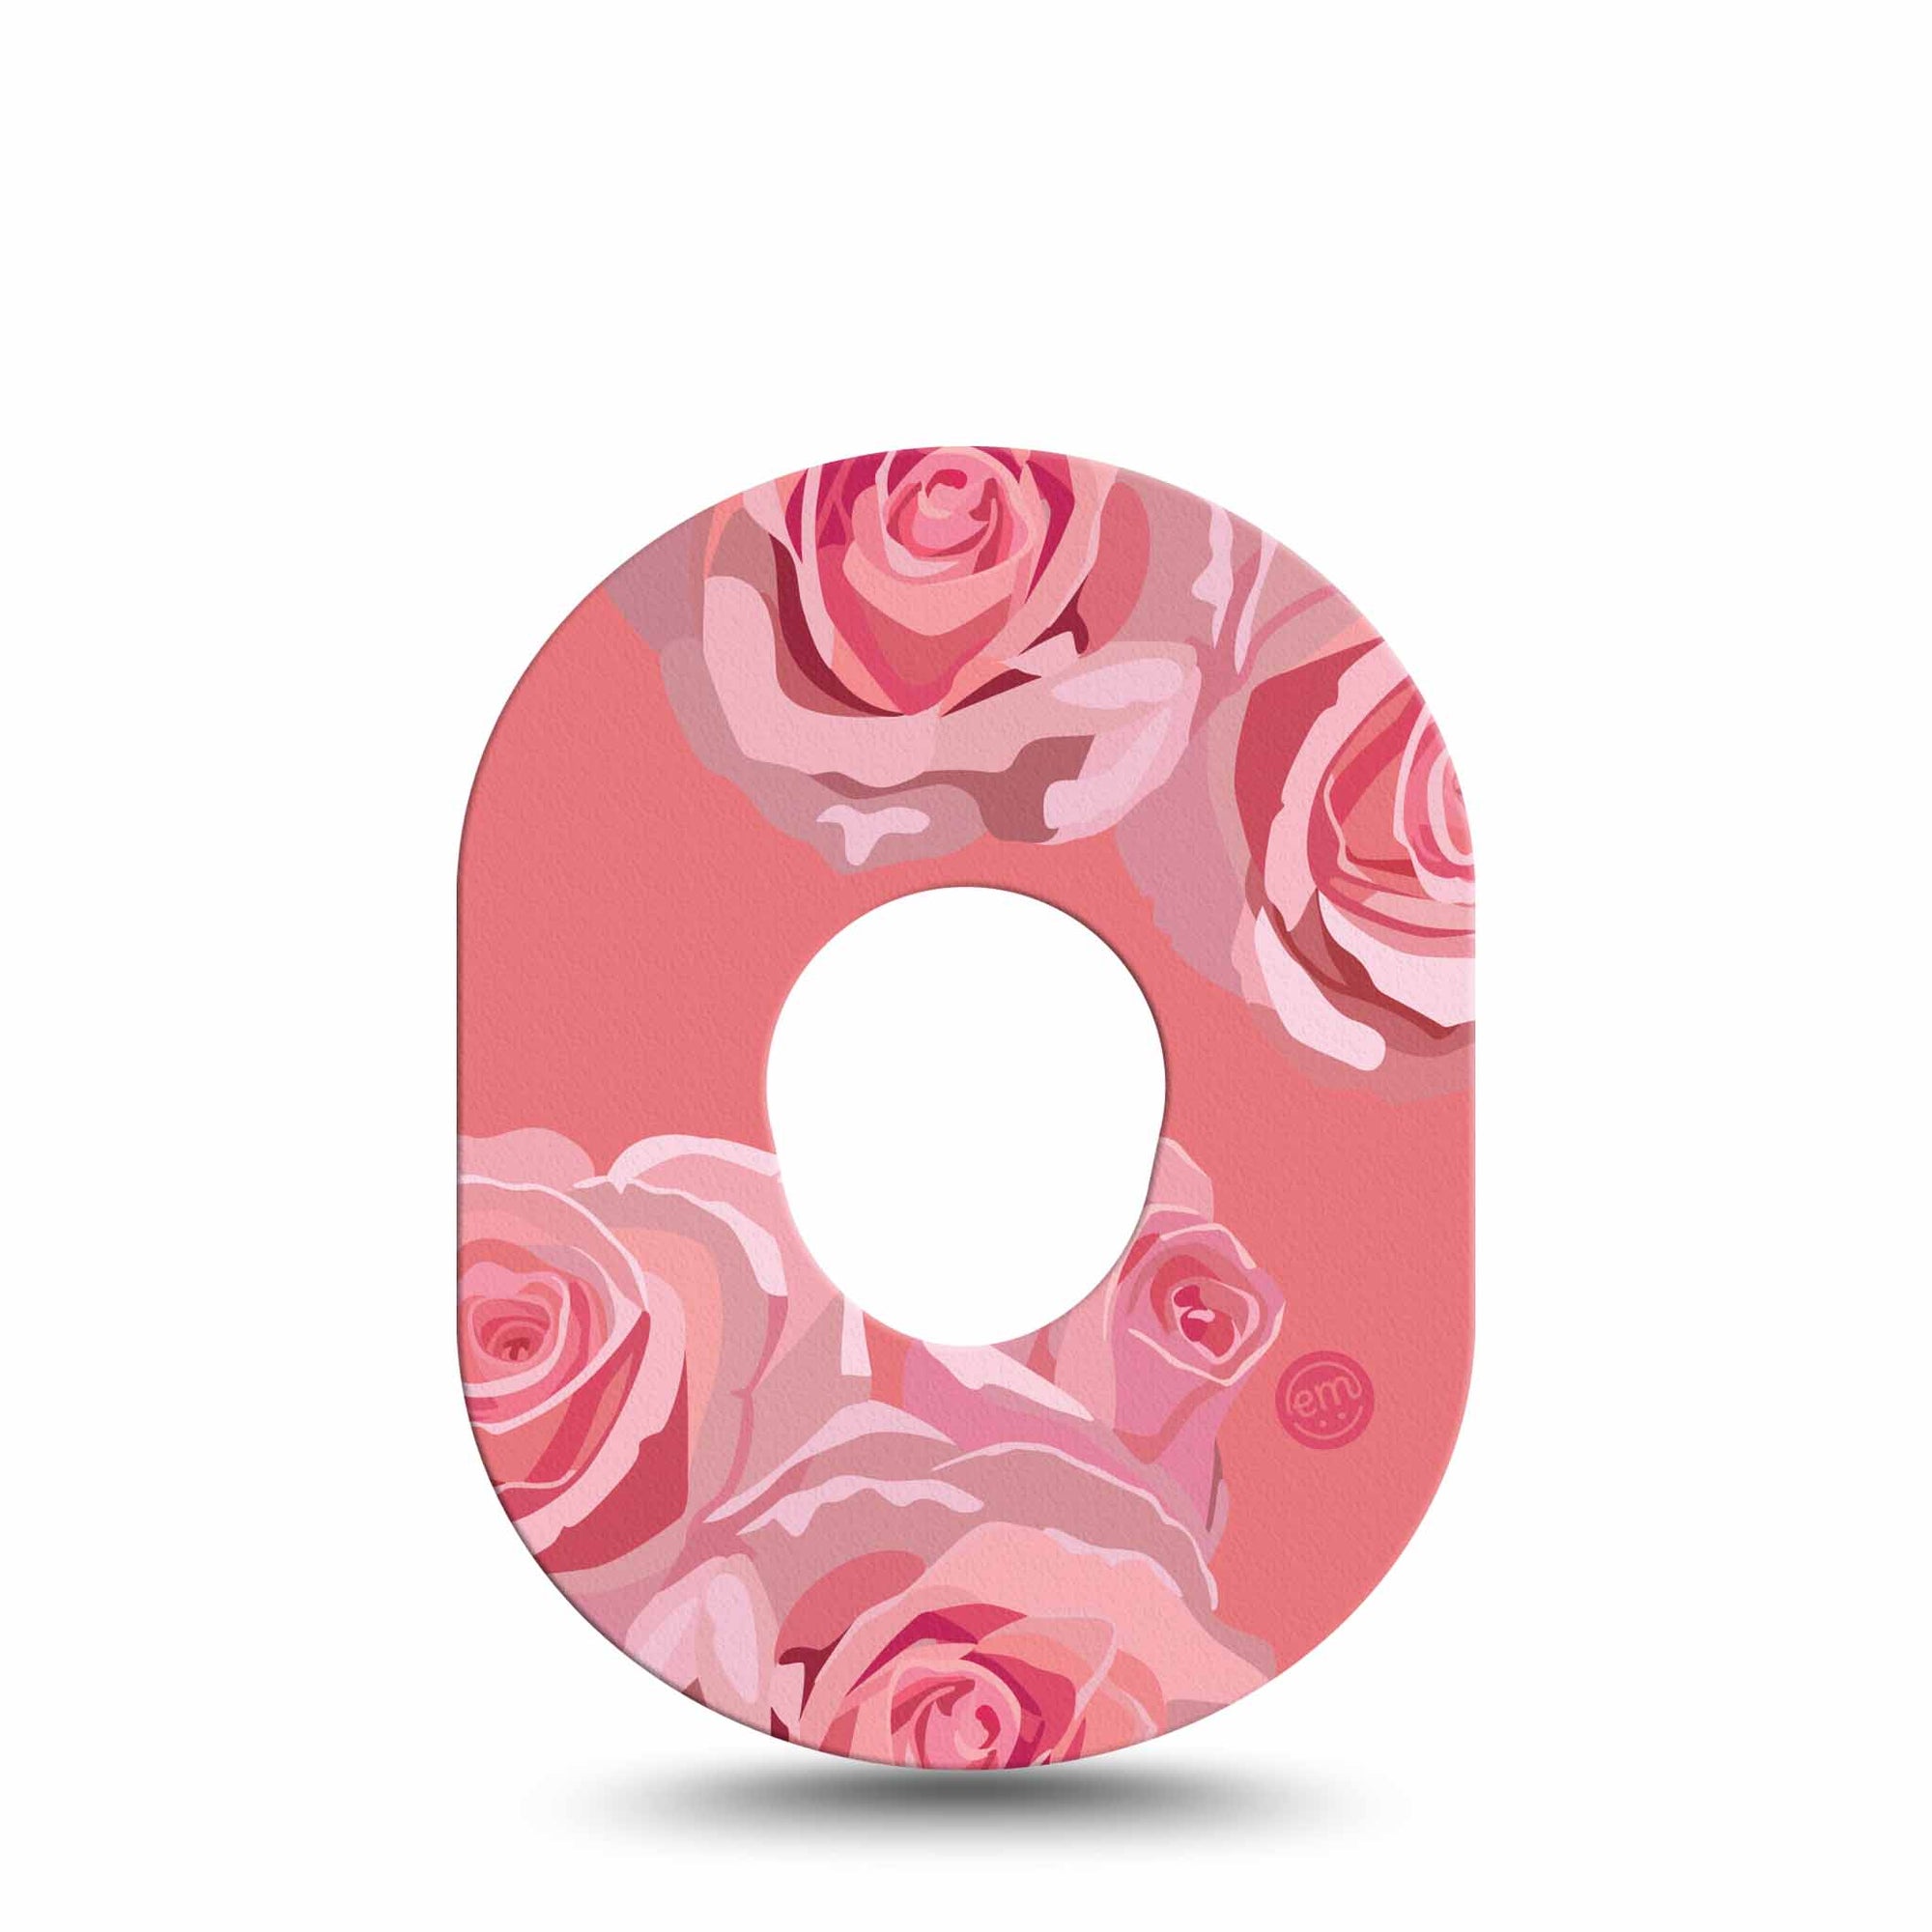 ExpressionMed Pretty Pink Roses Dexcom G6 Patch